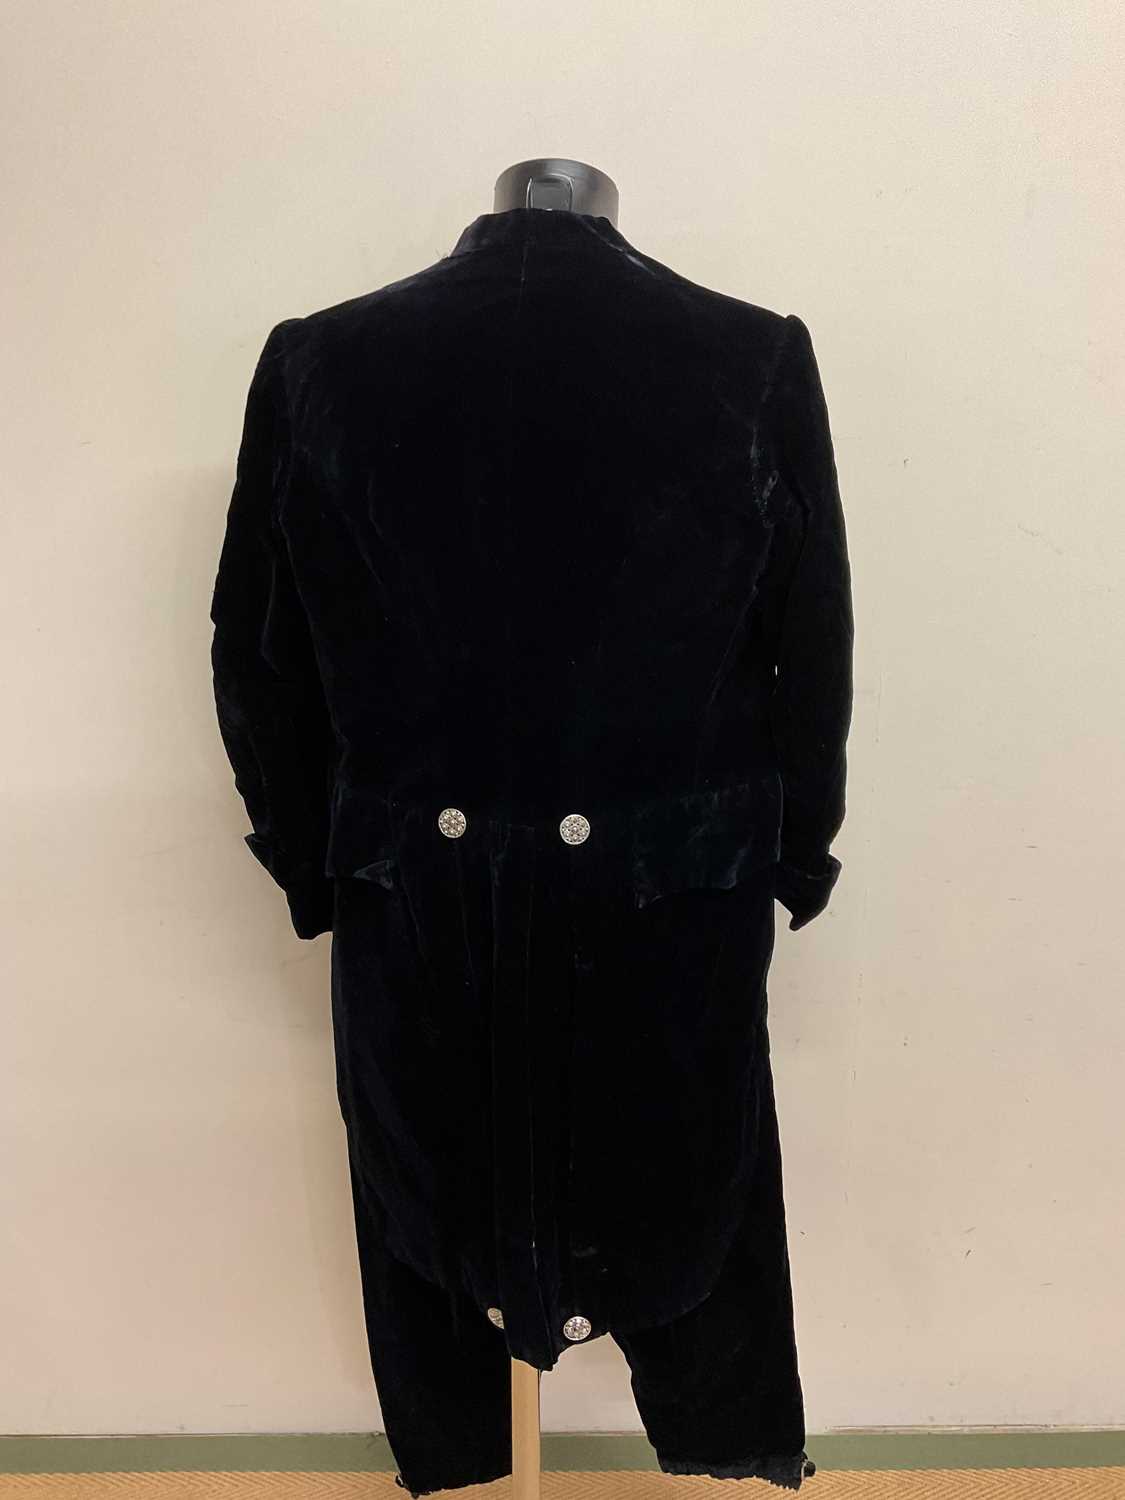 A vintage man's velvet tailcoat with waistcoat and knickerbockers, made by Robt F Gall, 13 Suffolk - Image 2 of 4